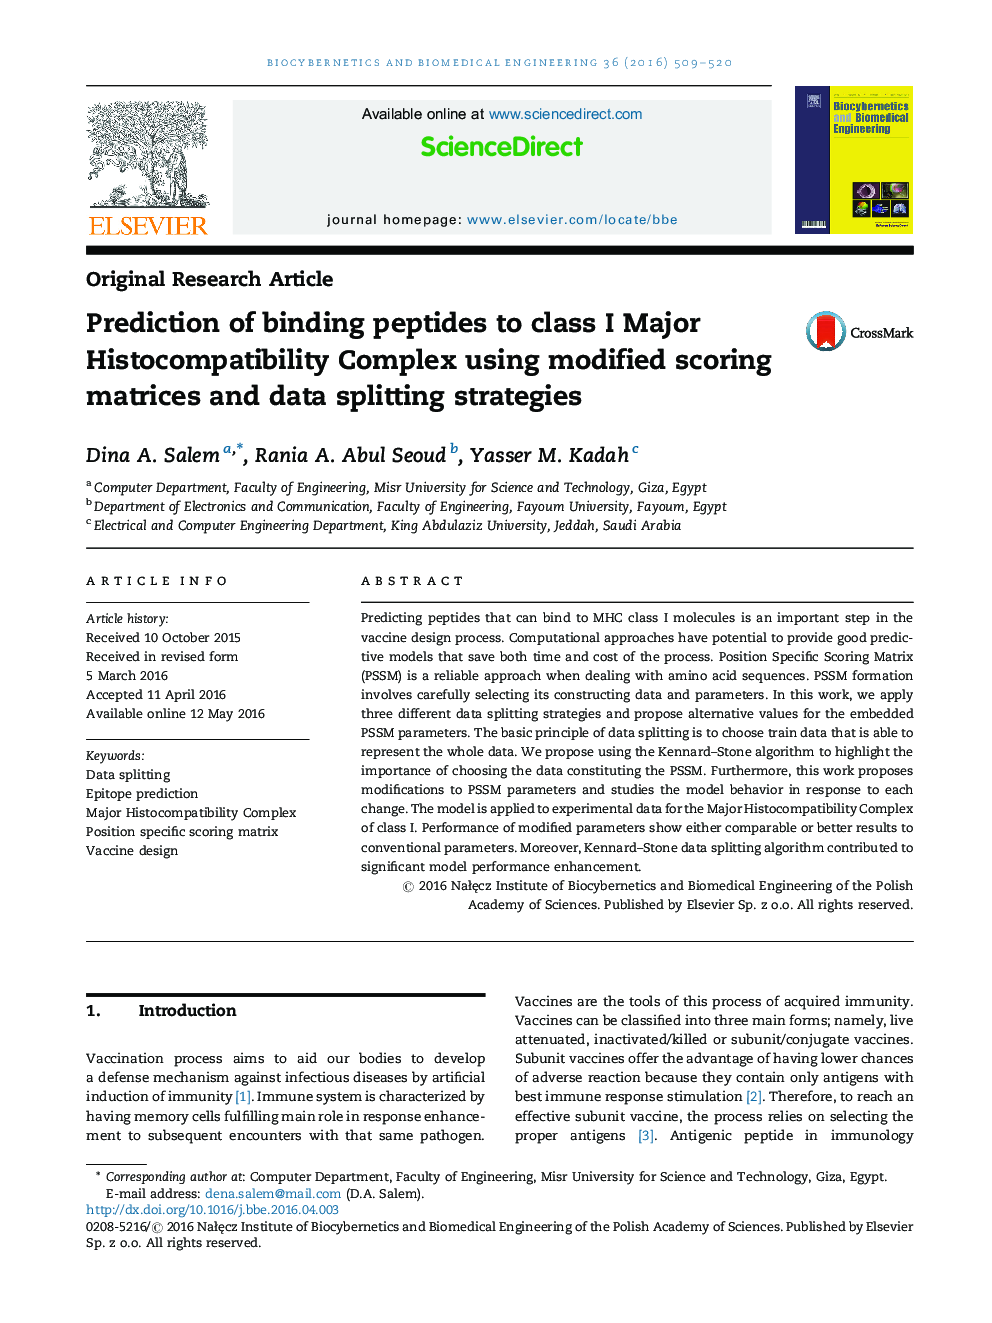 Prediction of binding peptides to class I Major Histocompatibility Complex using modified scoring matrices and data splitting strategies